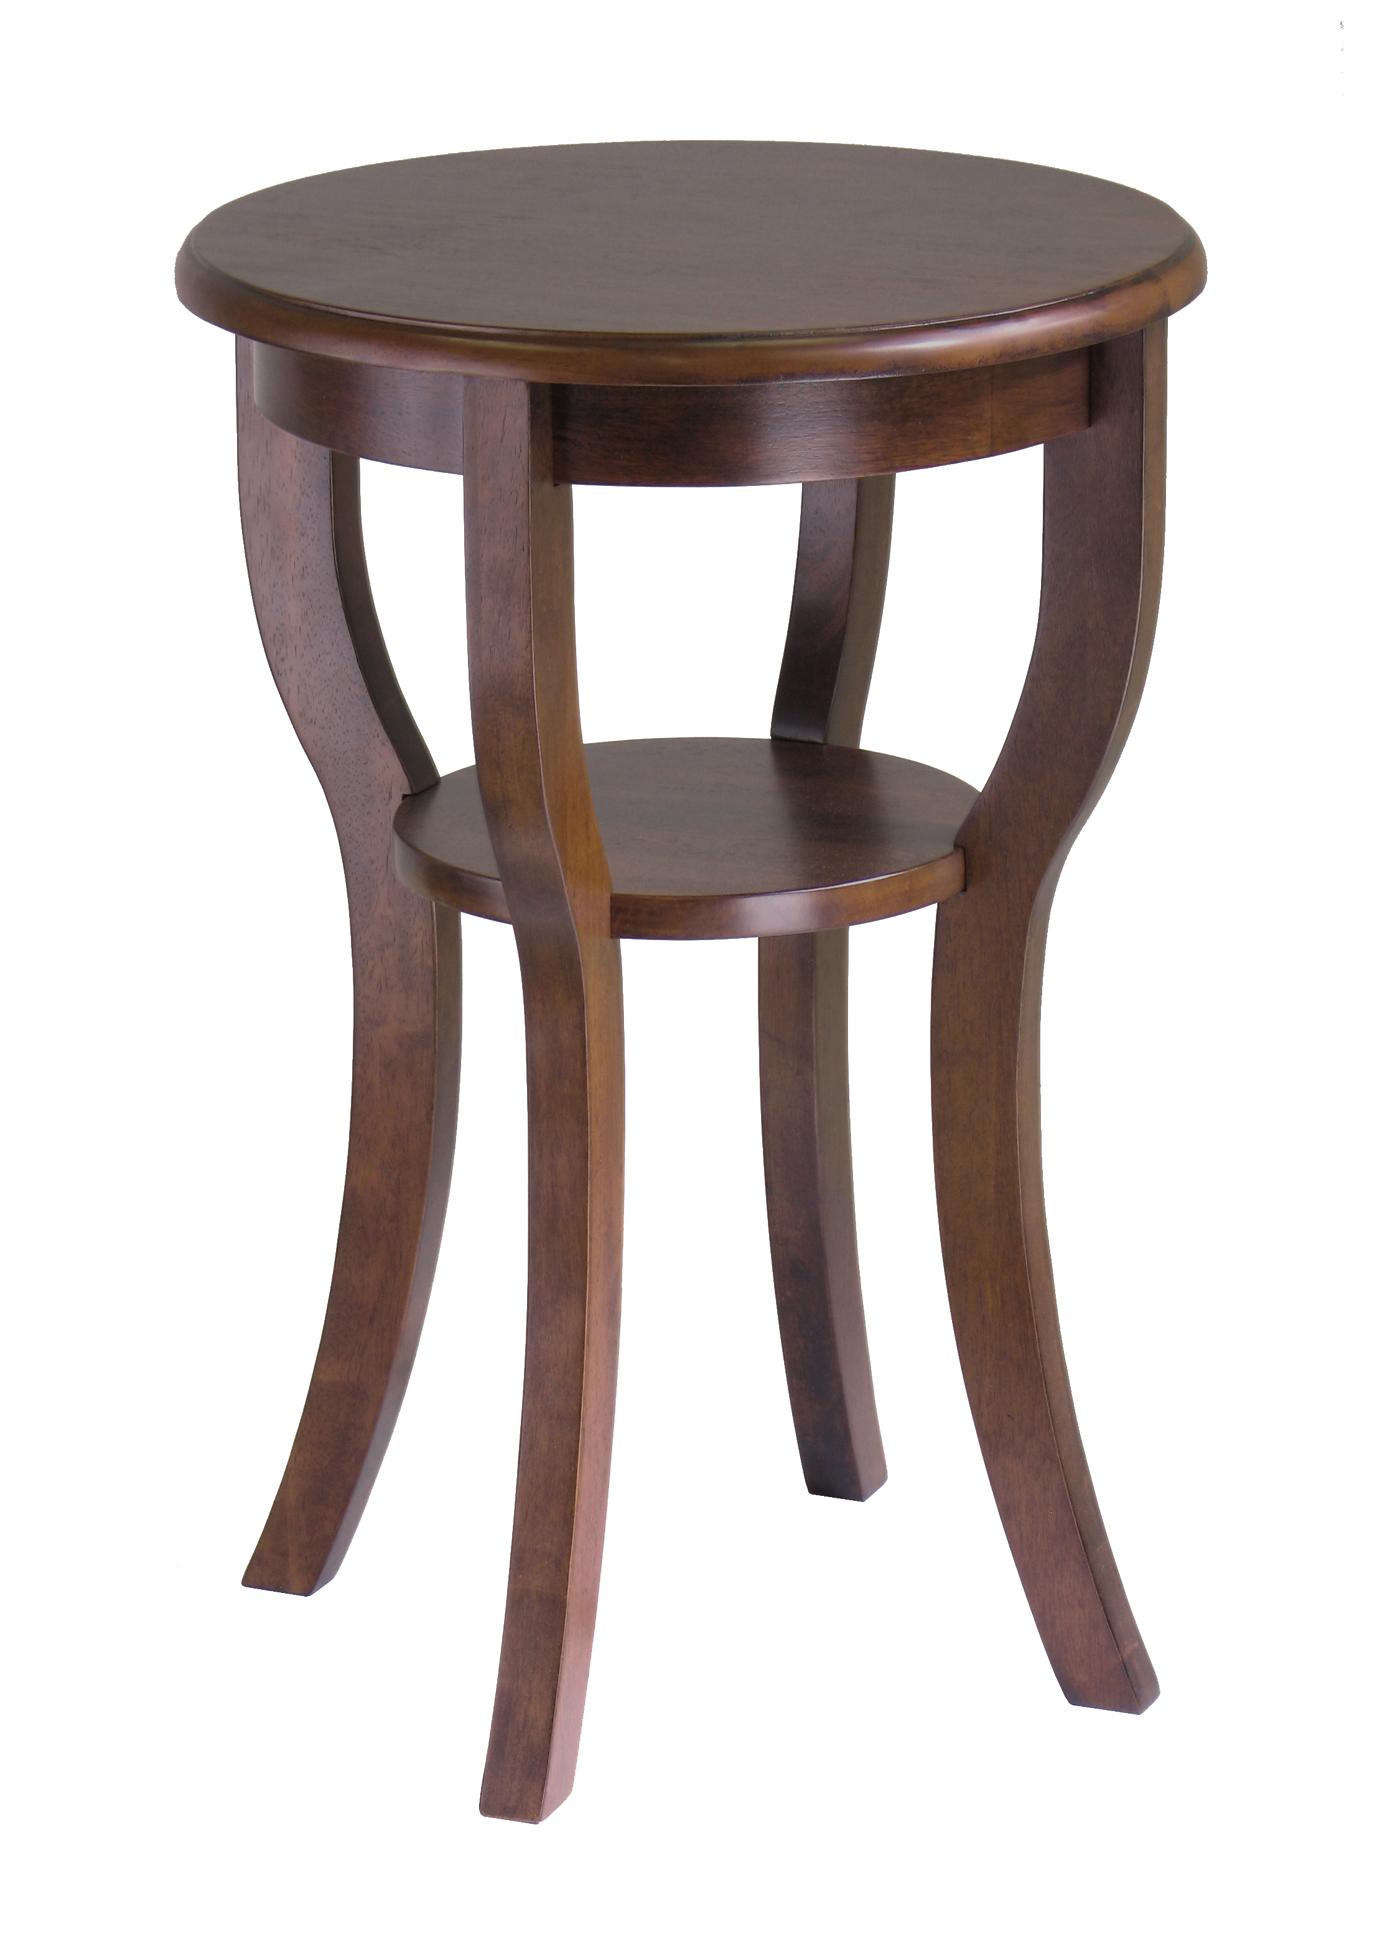 design wood accent table with curved legs home and furniture sheesham bar height breakfast dale tiffany butterfly lamp bathroom black mirror coffee silver centerpieces for dining